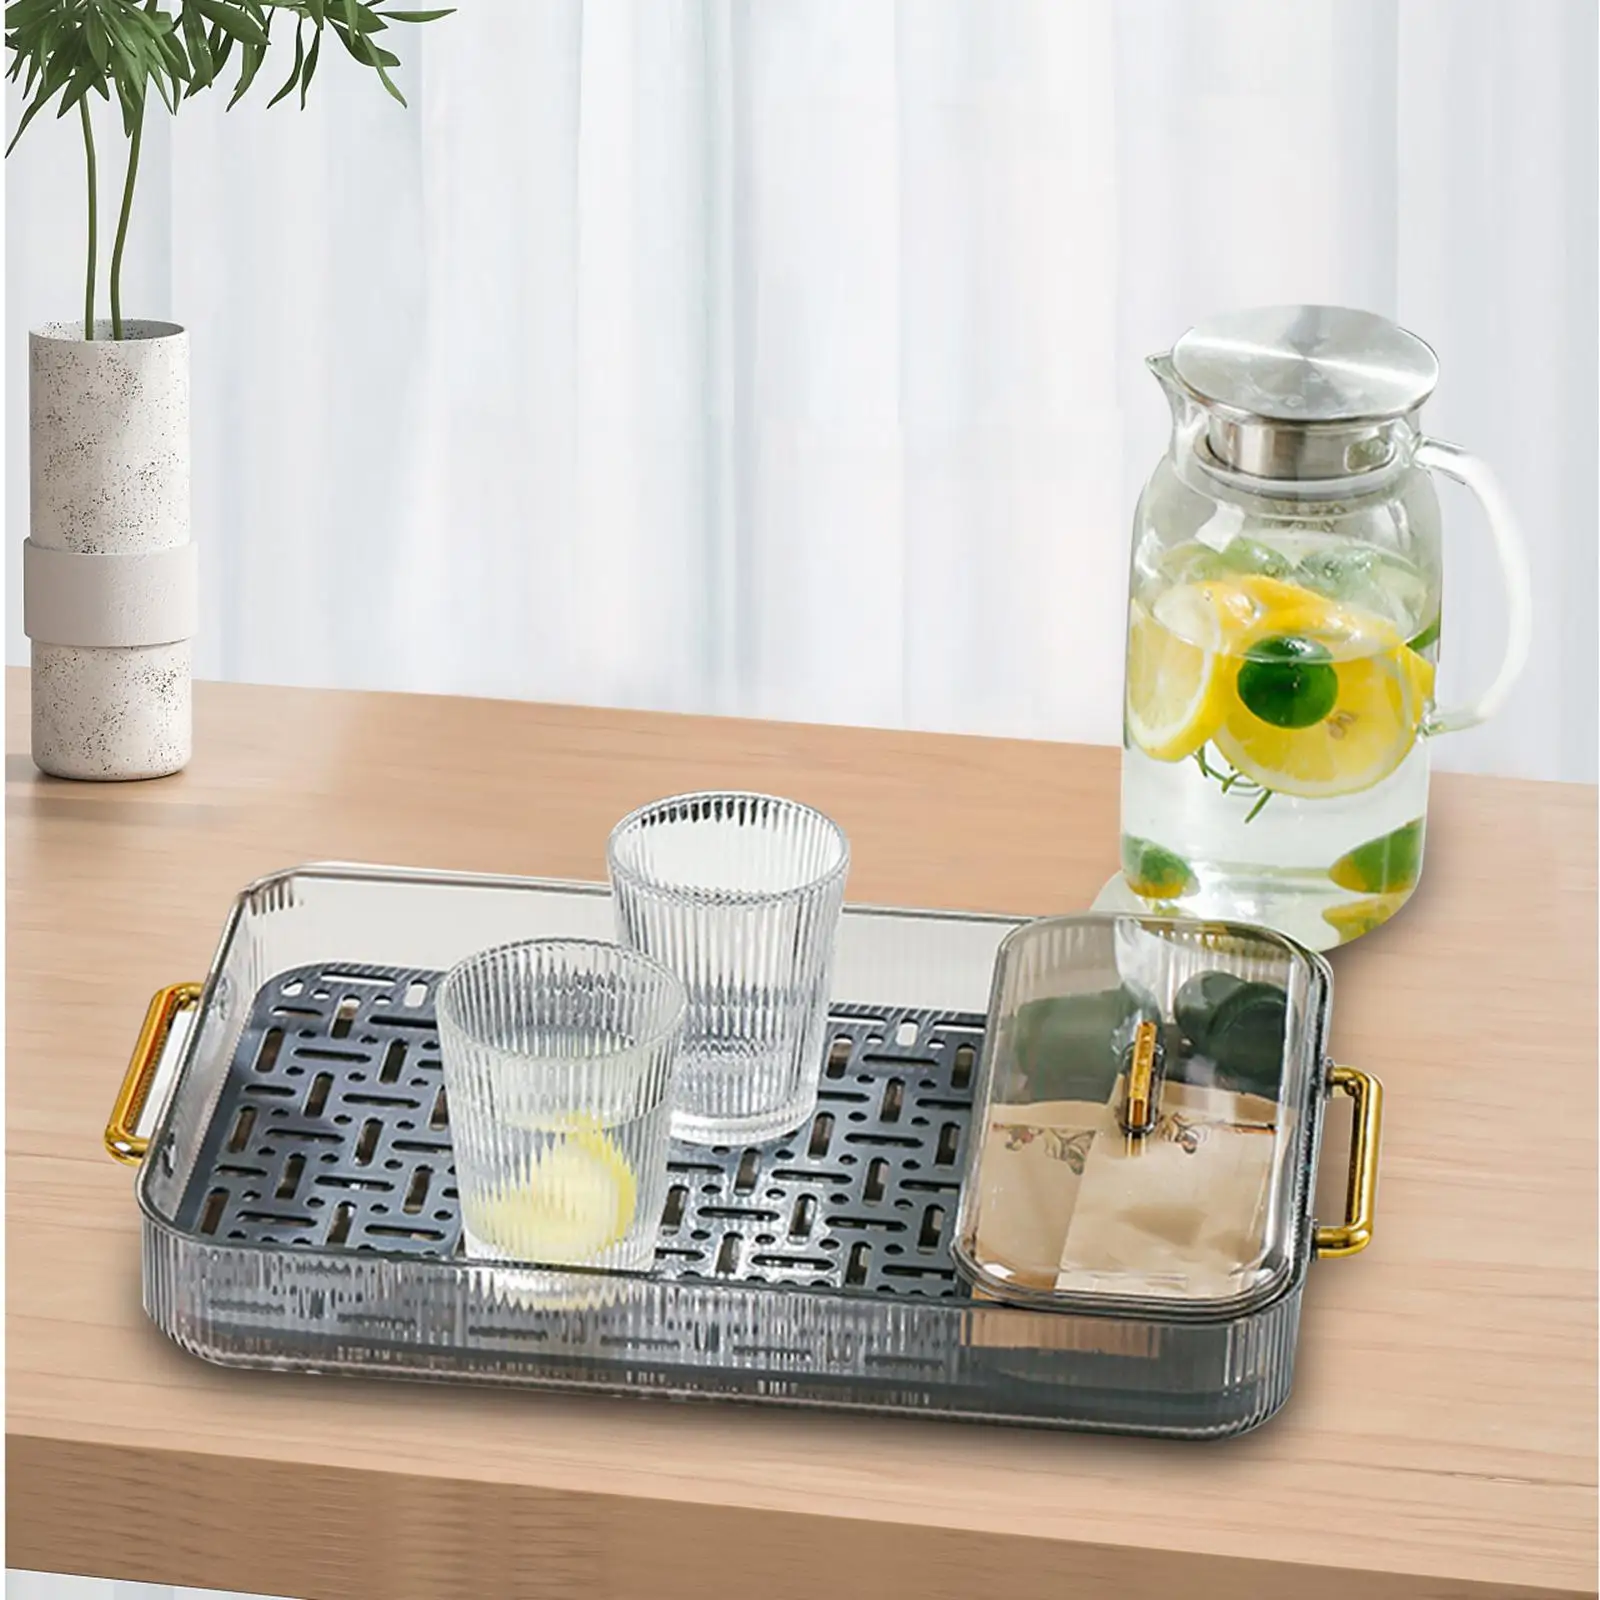 Drain Board with Storage Box Decorative Multifunctional Serving Tray Kungfu Tea Tray Tea Table Tray for Home Kitchen Countertop